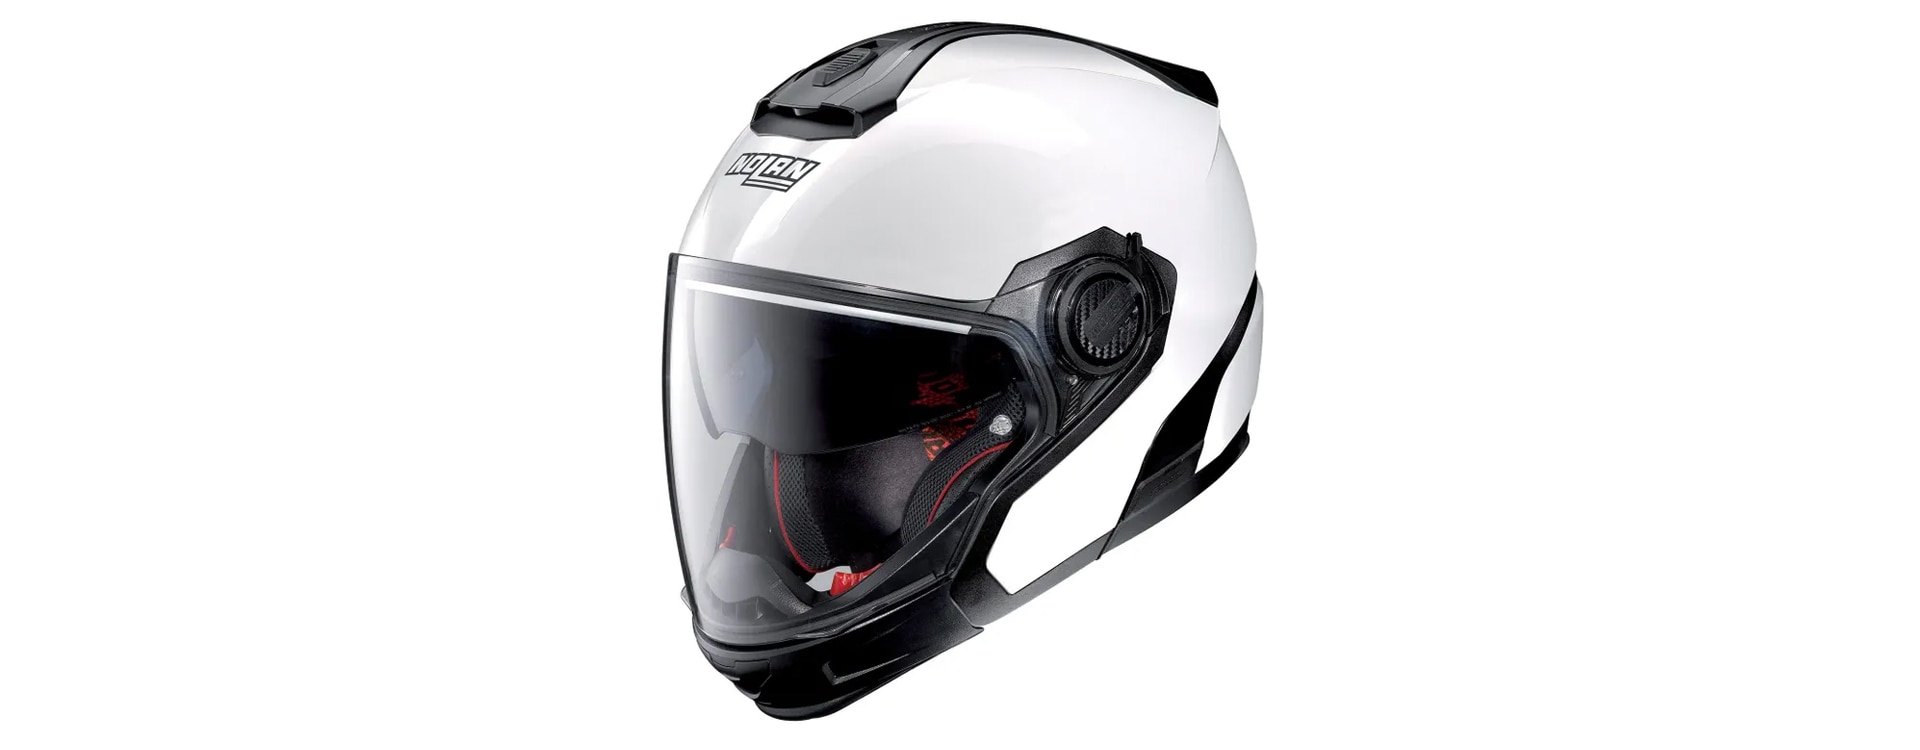 Casque crossover Can-Am N40-5 GT SPECIAL blanc 